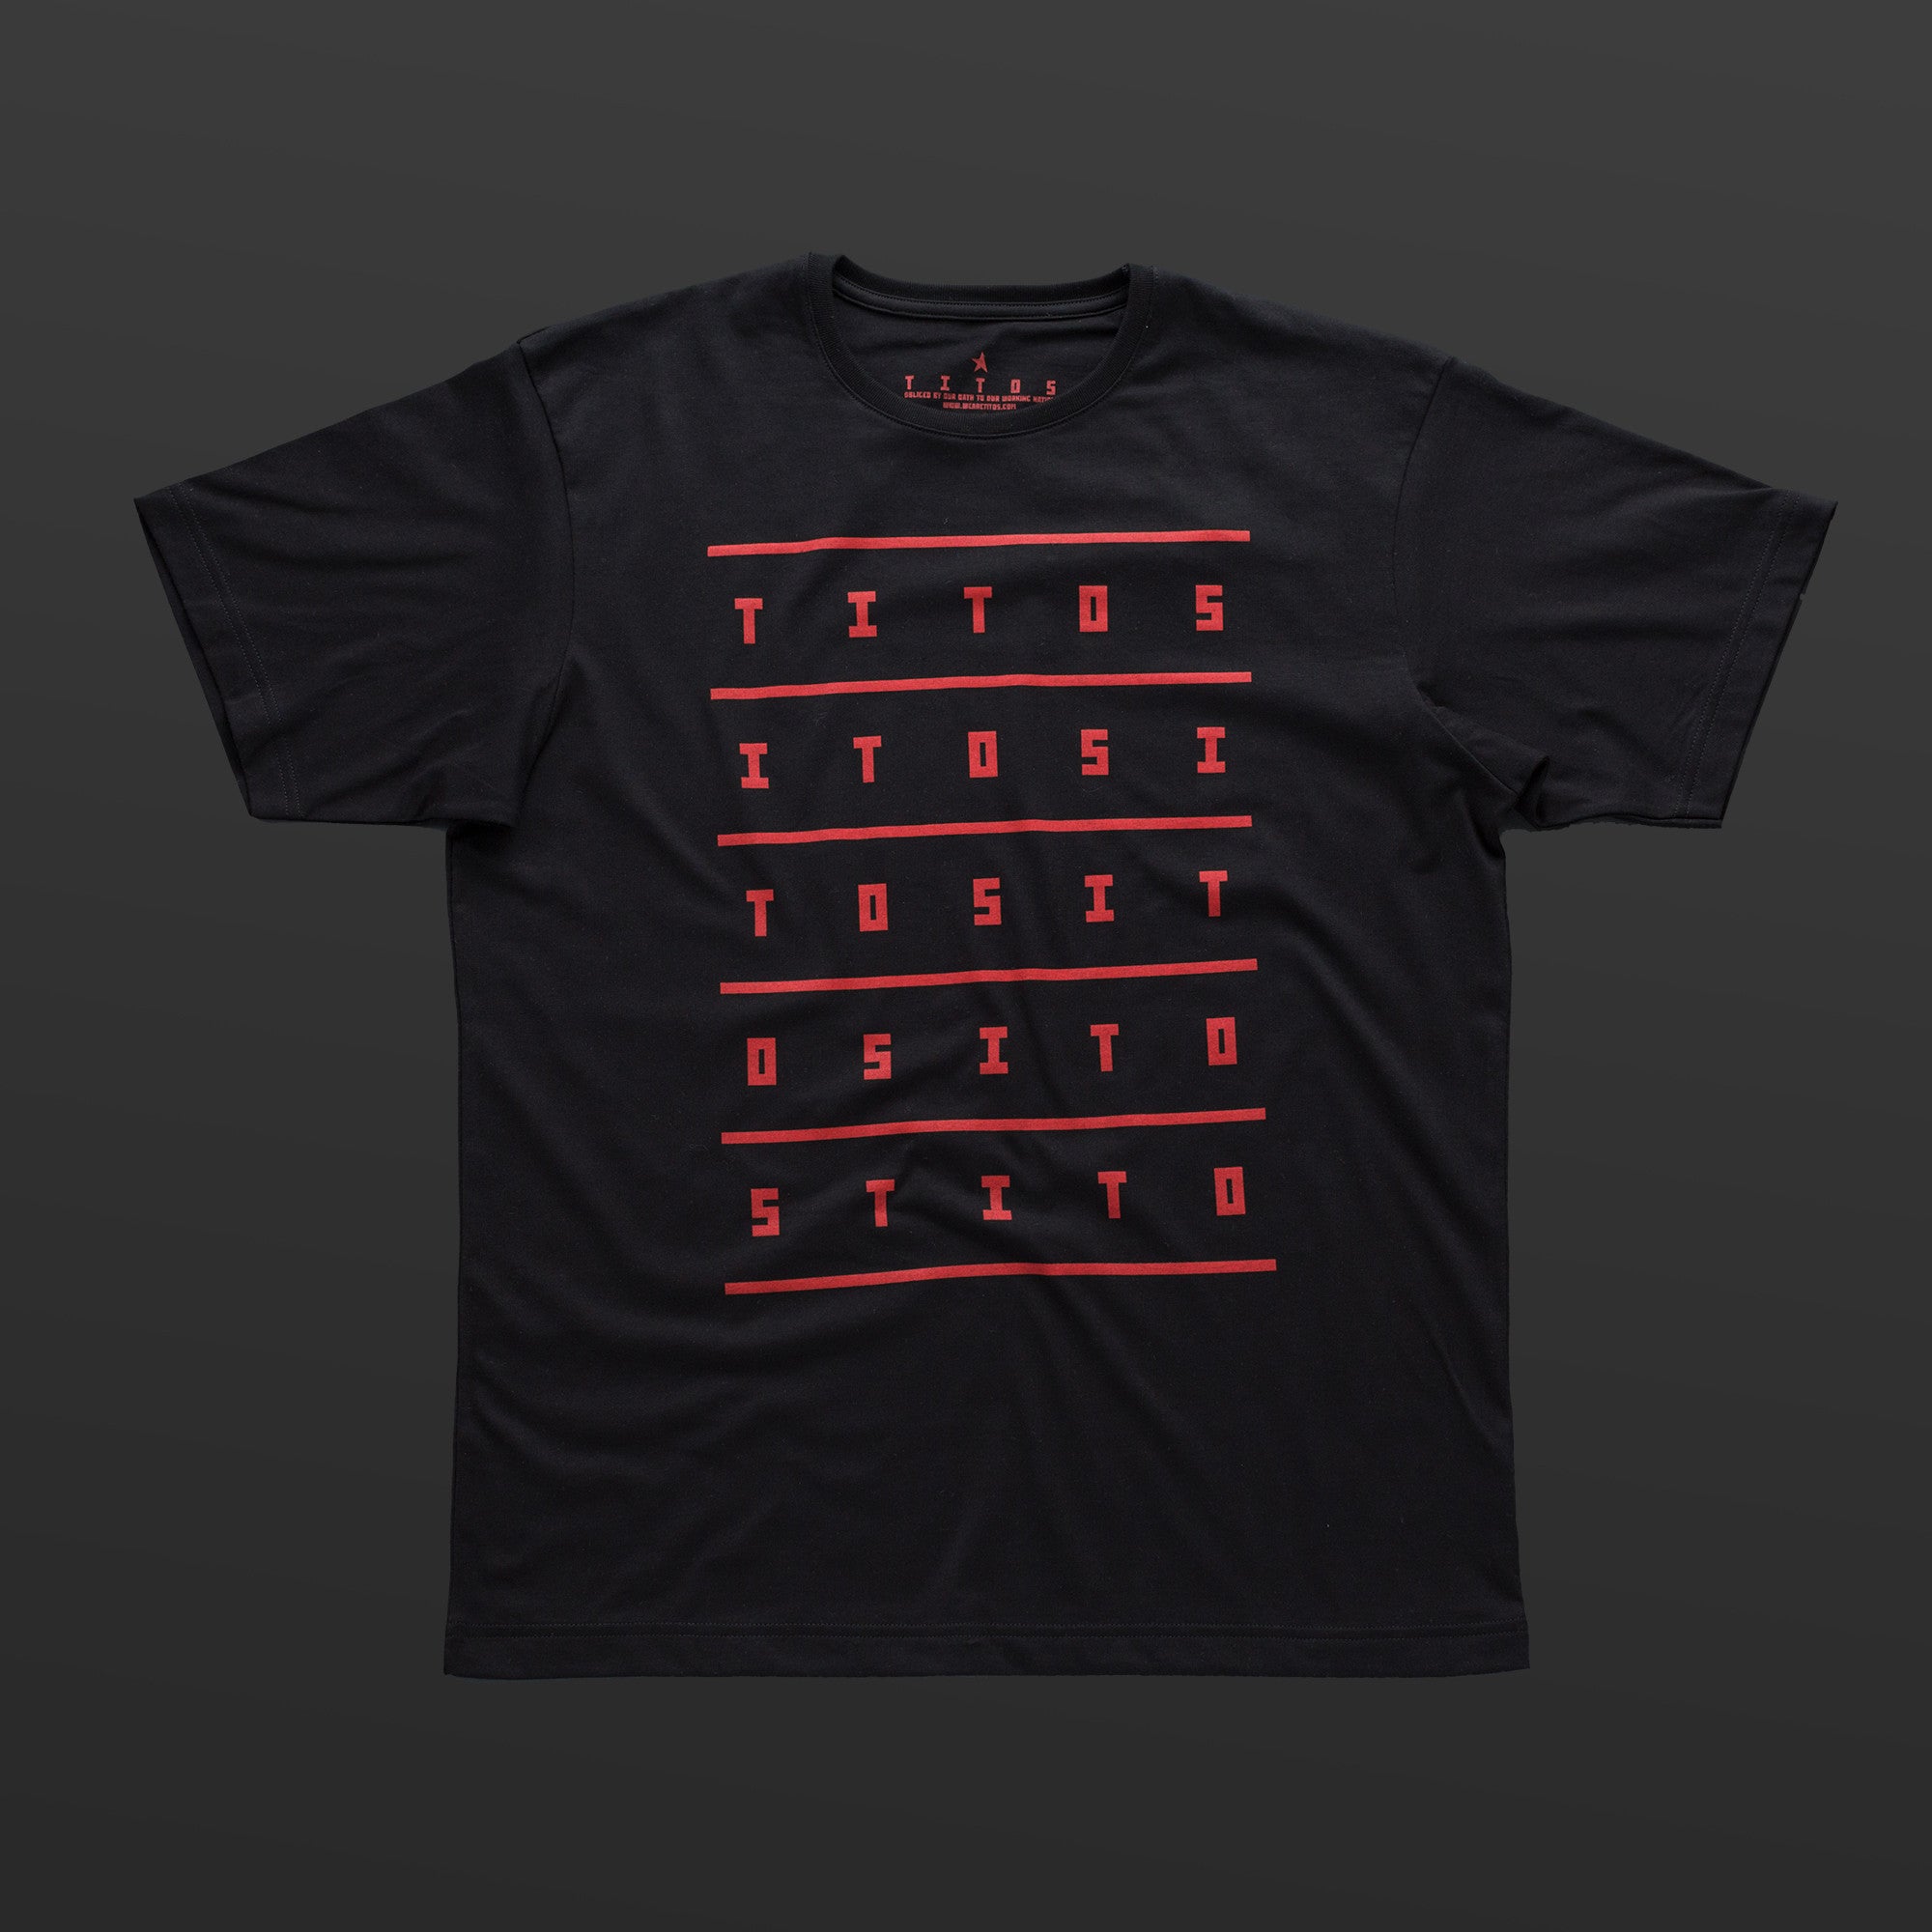 Second T-shirt black/red TITOS 5X5 letters